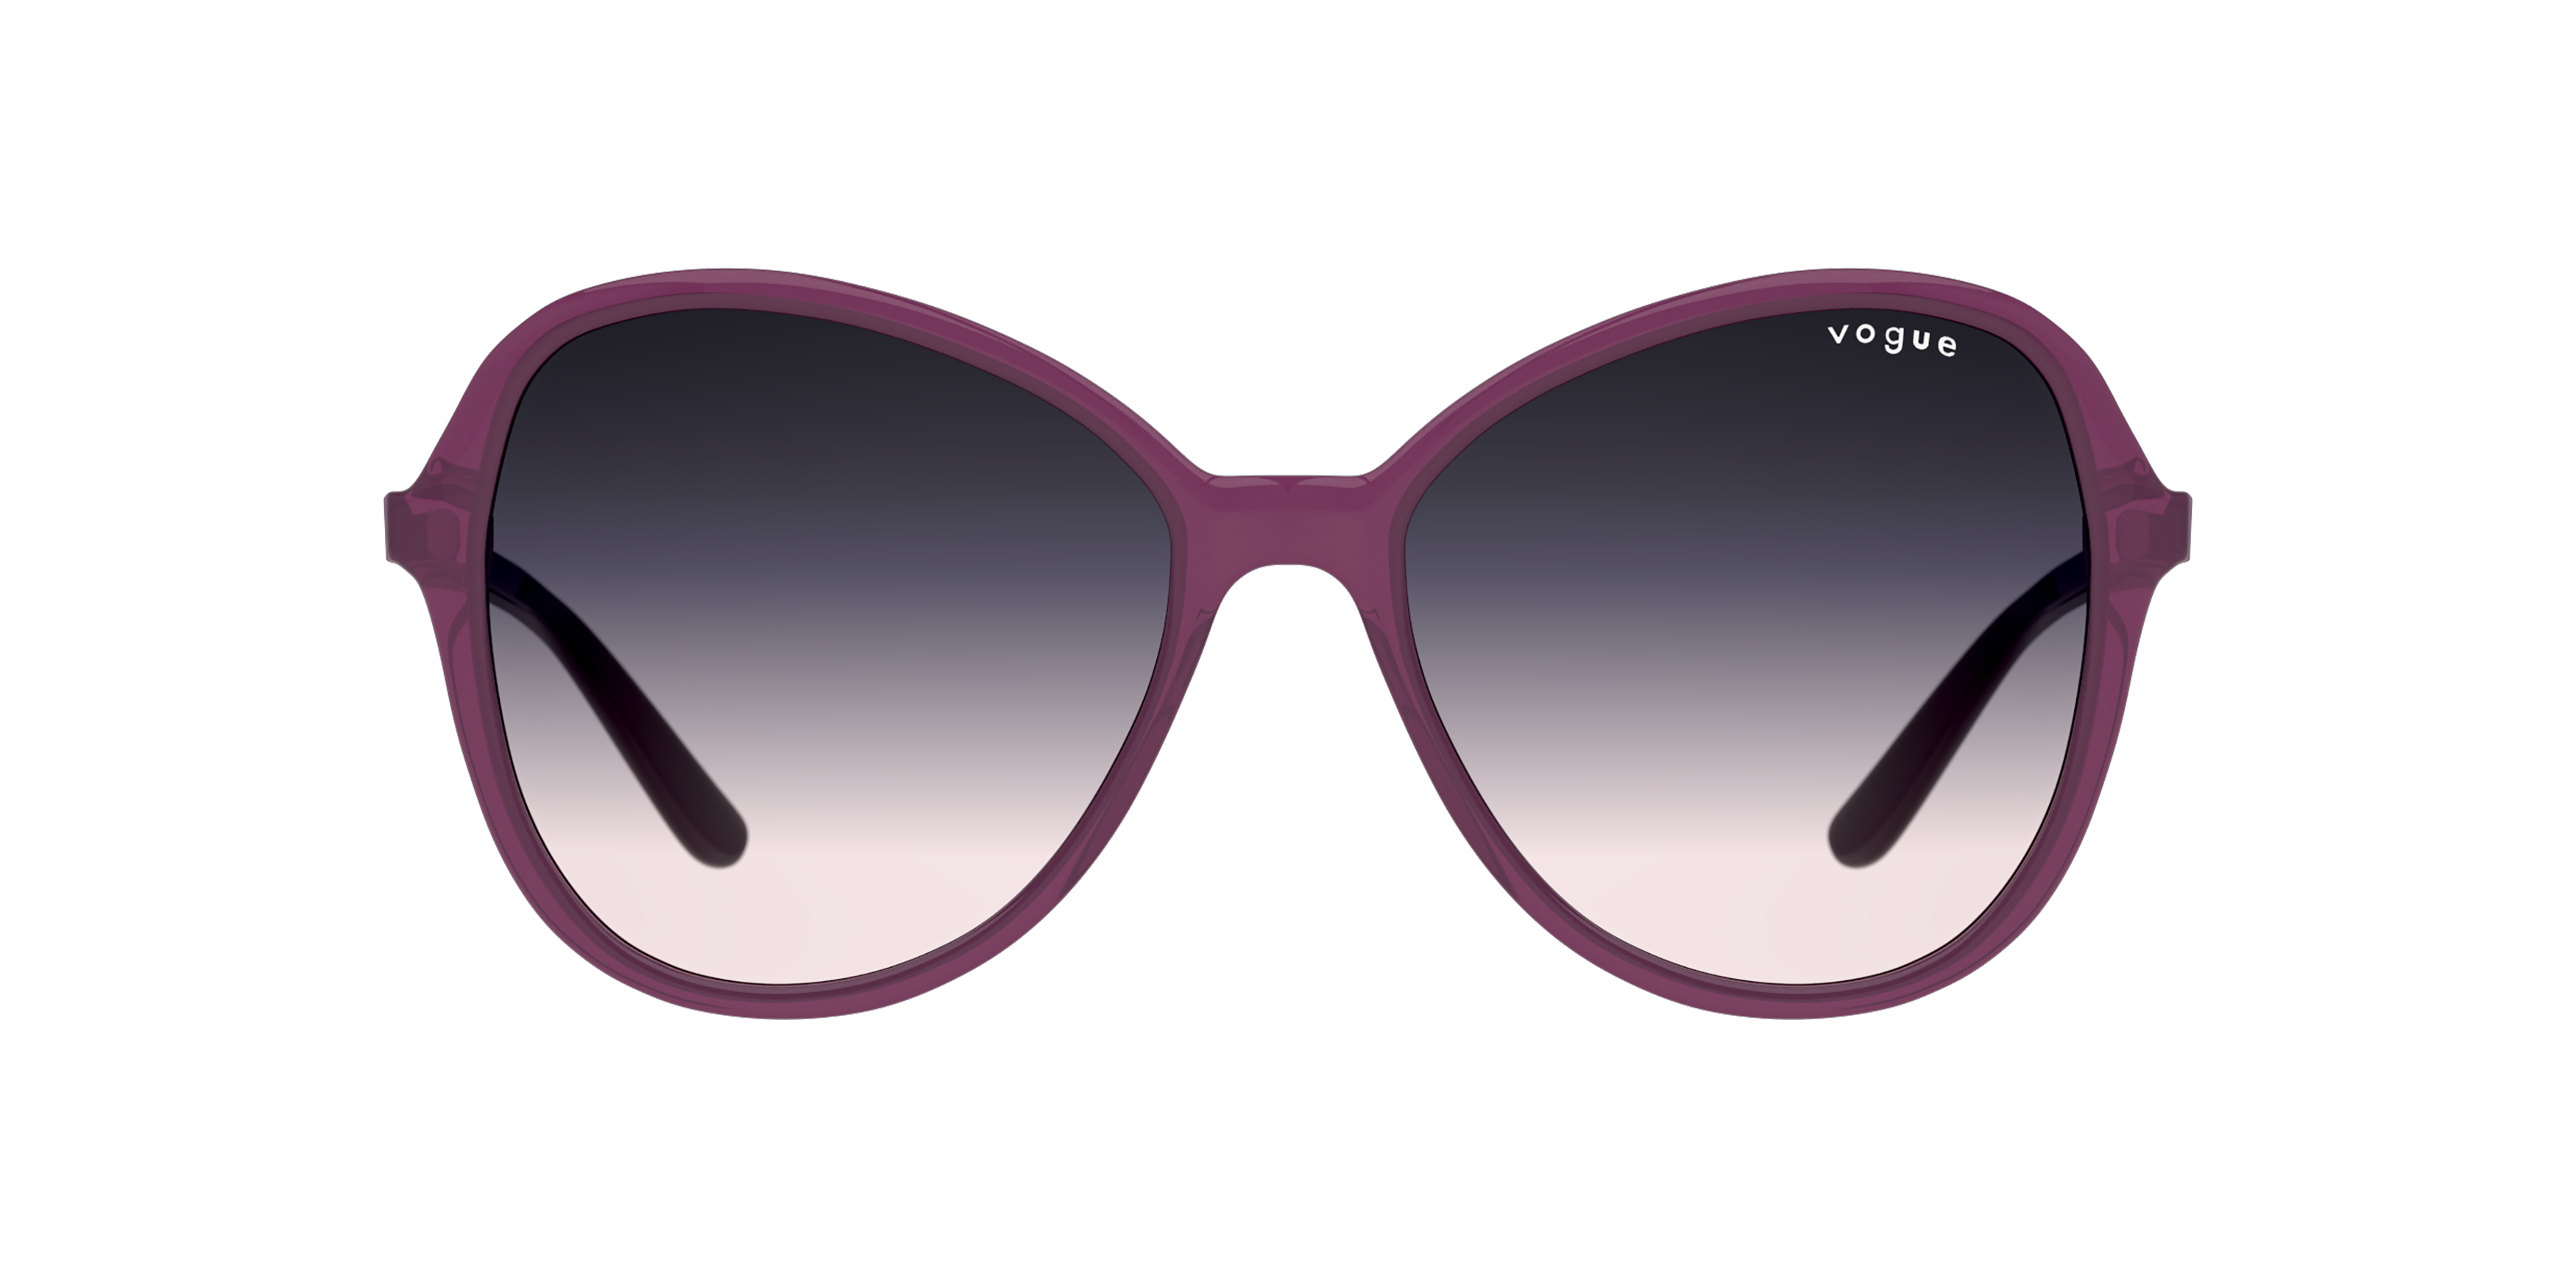 [products.image.front] Vogue Eyewear 0VO5349S 276136